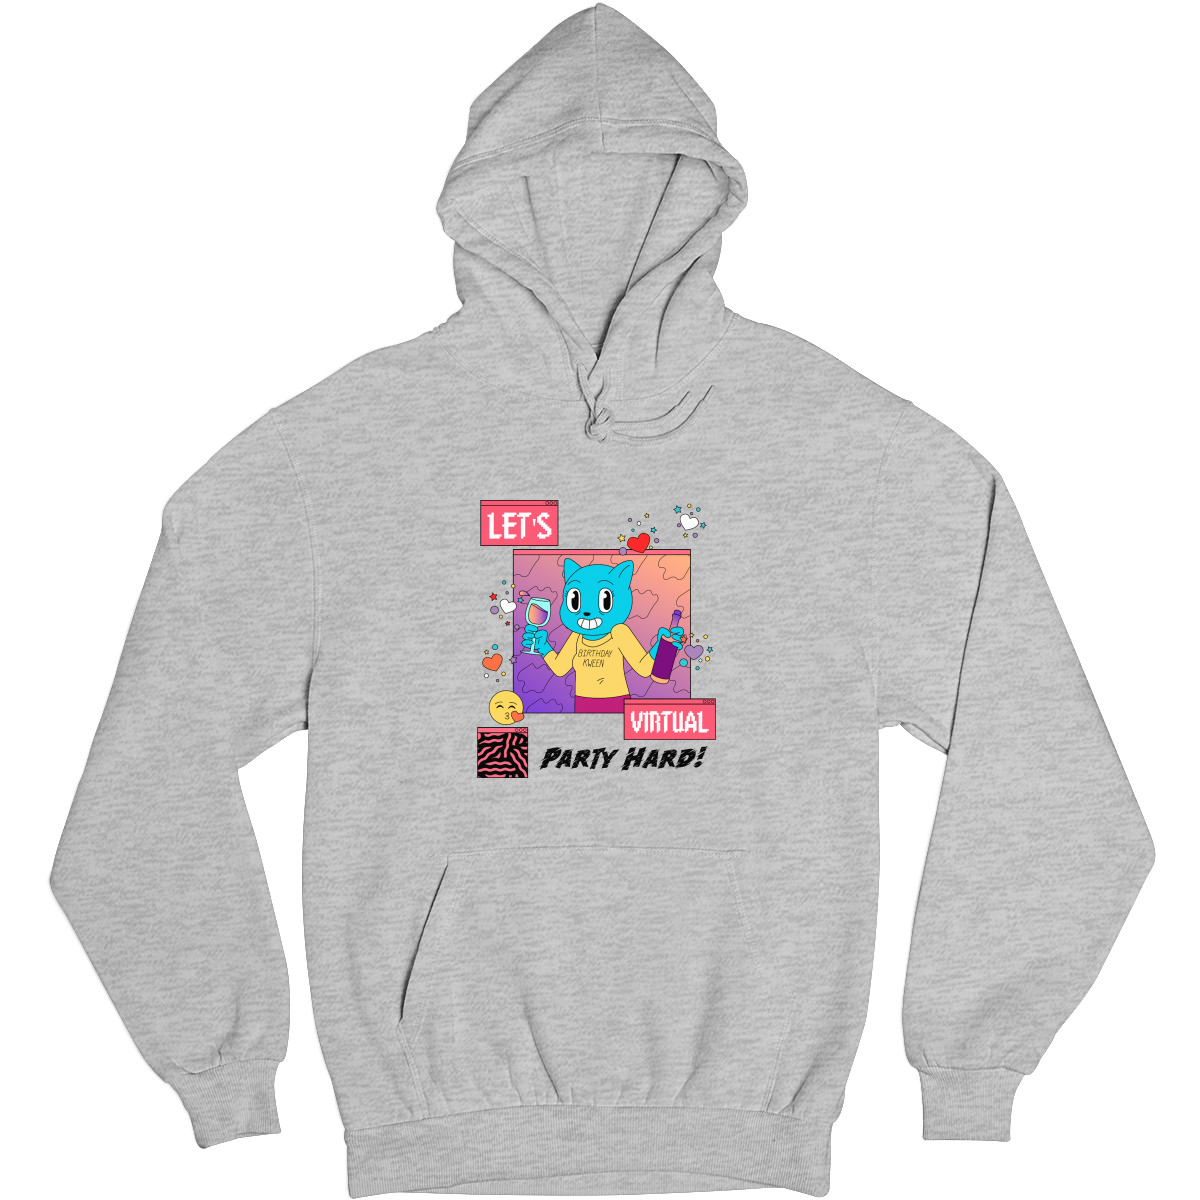 Let's Virtual Party Hard Unisex Hoodie | Gray